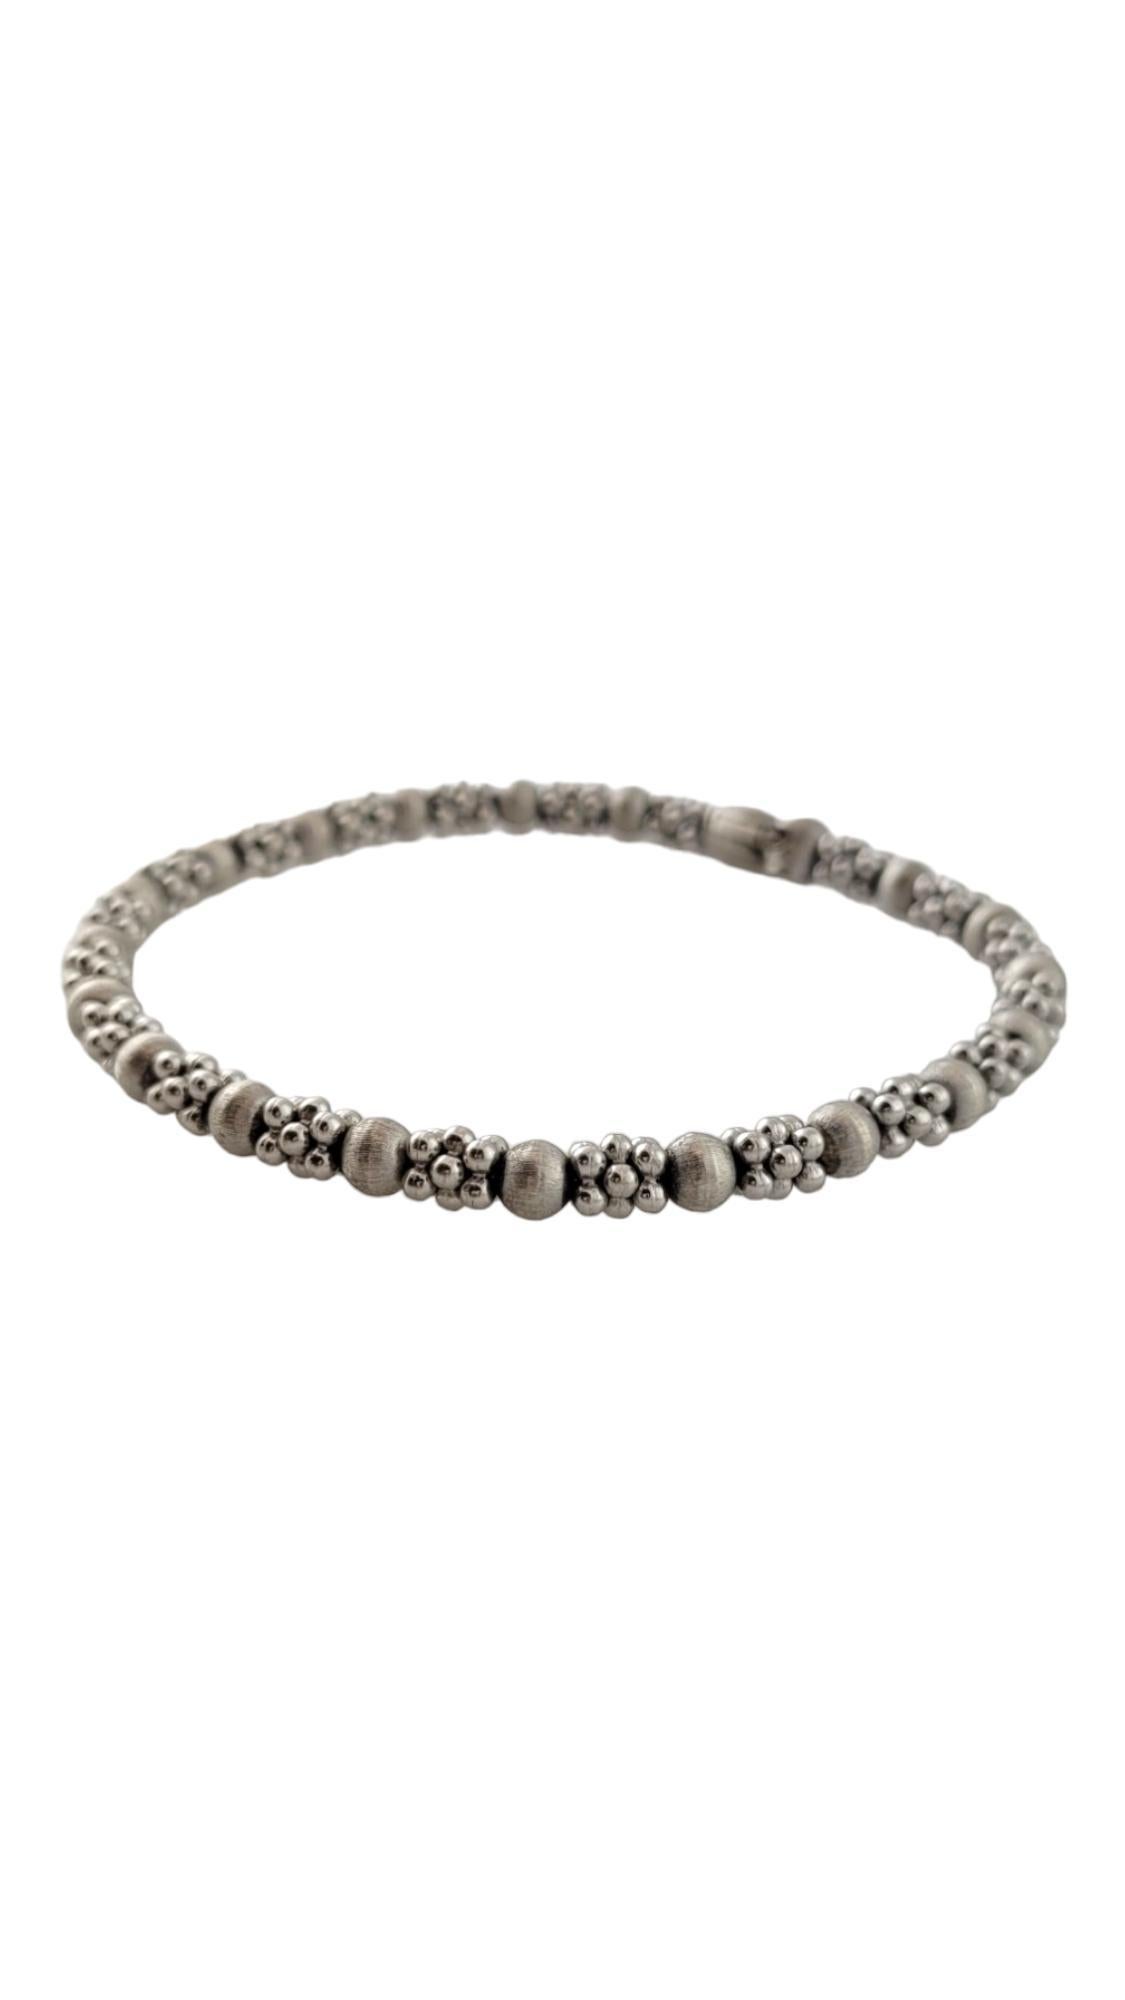 Marco Bicego 18K White Gold Beaded Bracelet #16488 In Good Condition For Sale In Washington Depot, CT